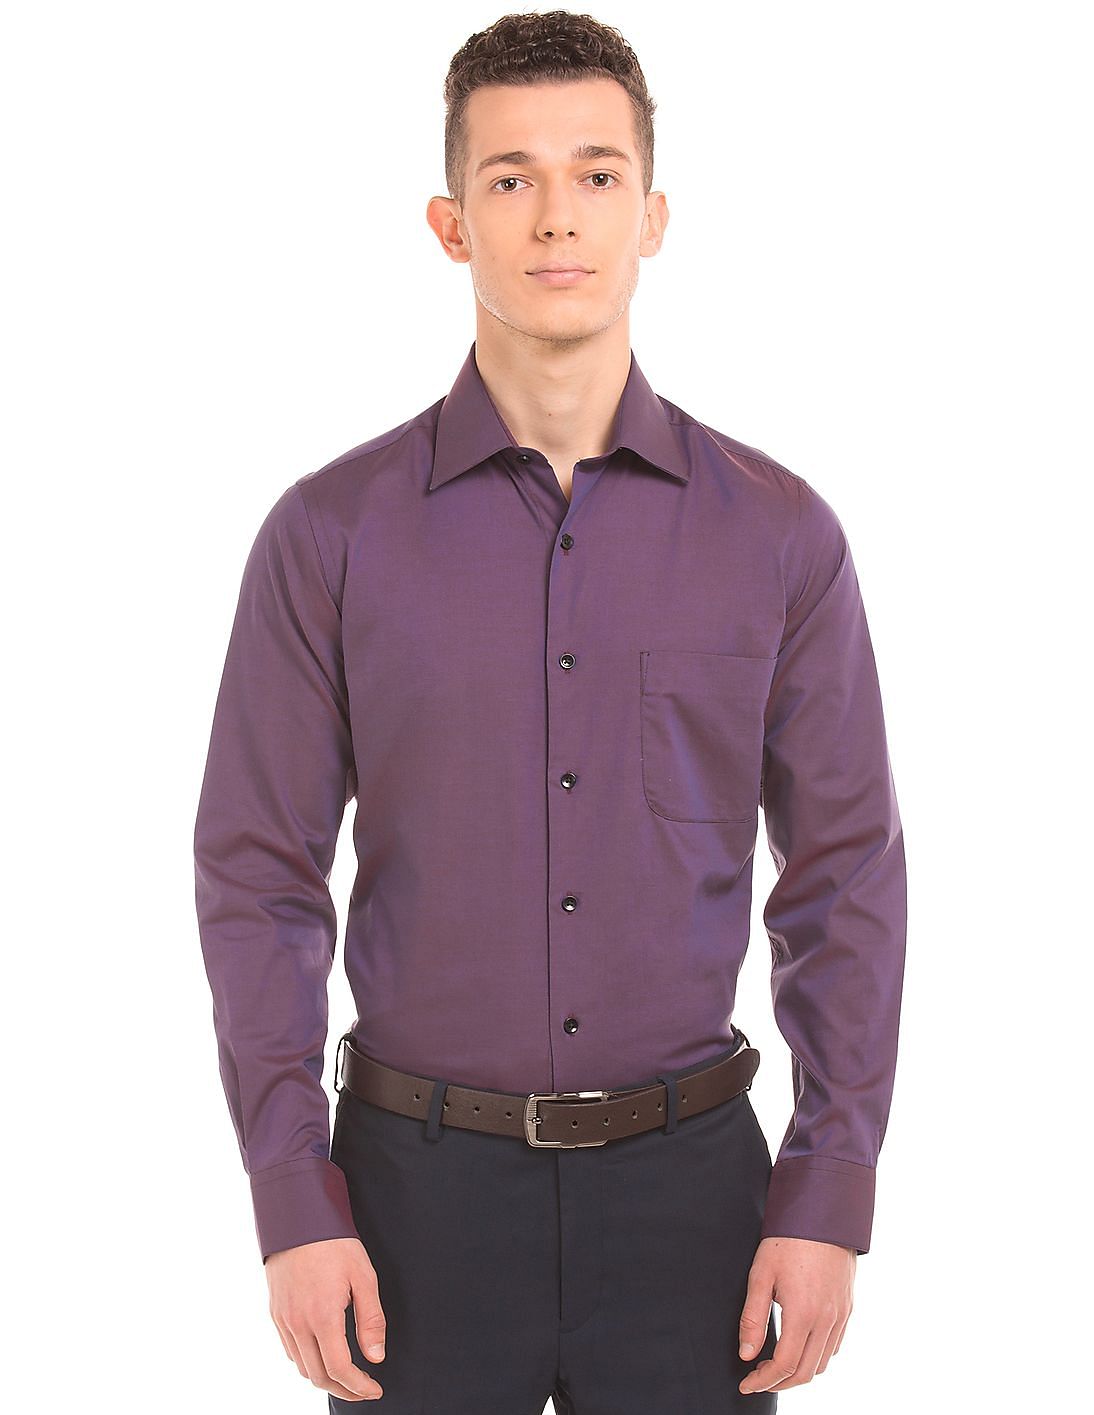 Buy Arrow French Placket Patterned Shirt - NNNOW.com